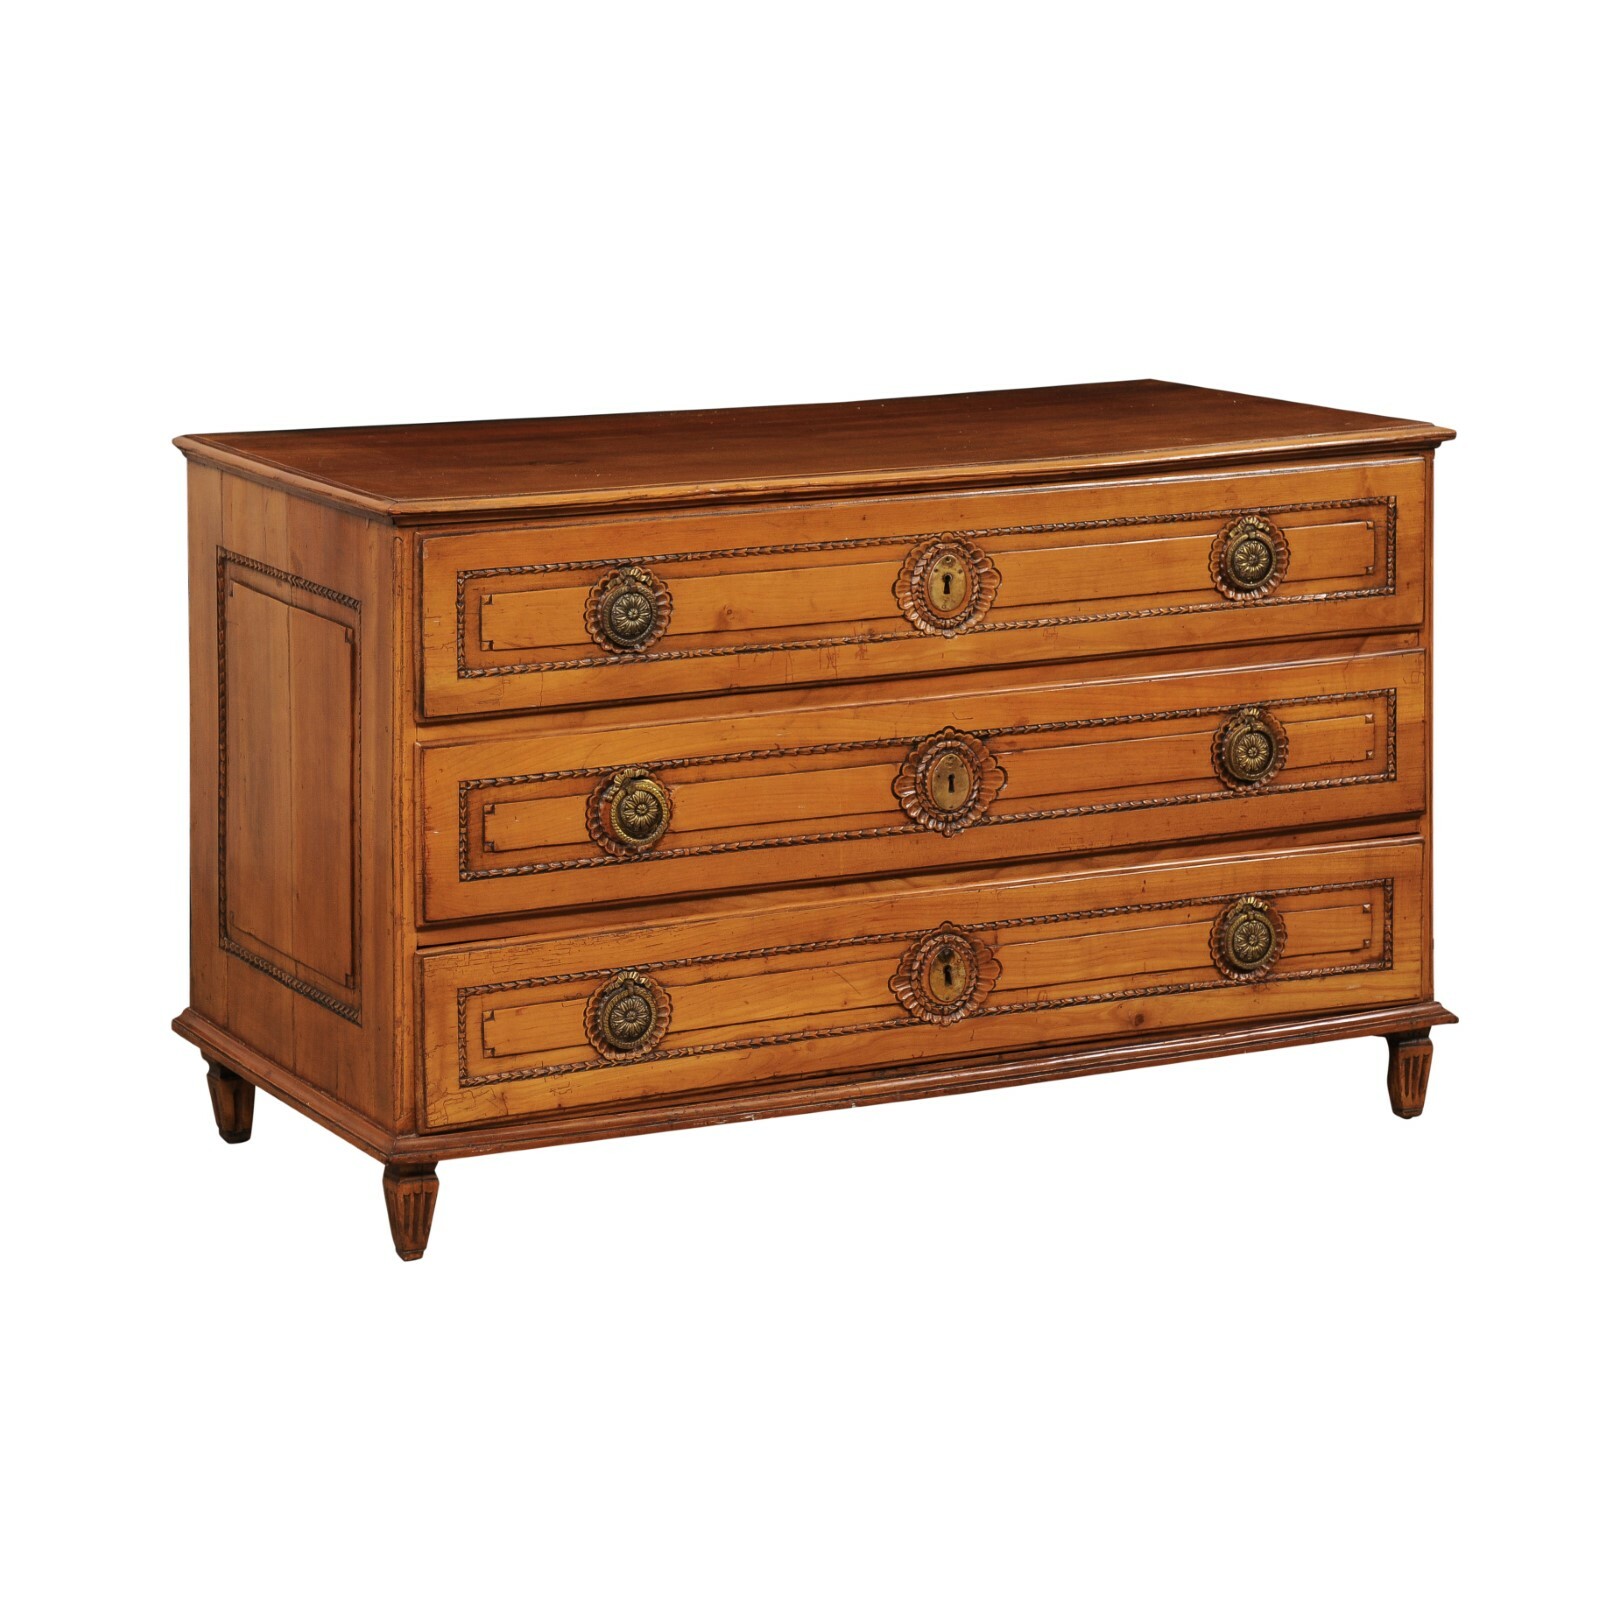 18th C. French Commode w/Nice Trim Details